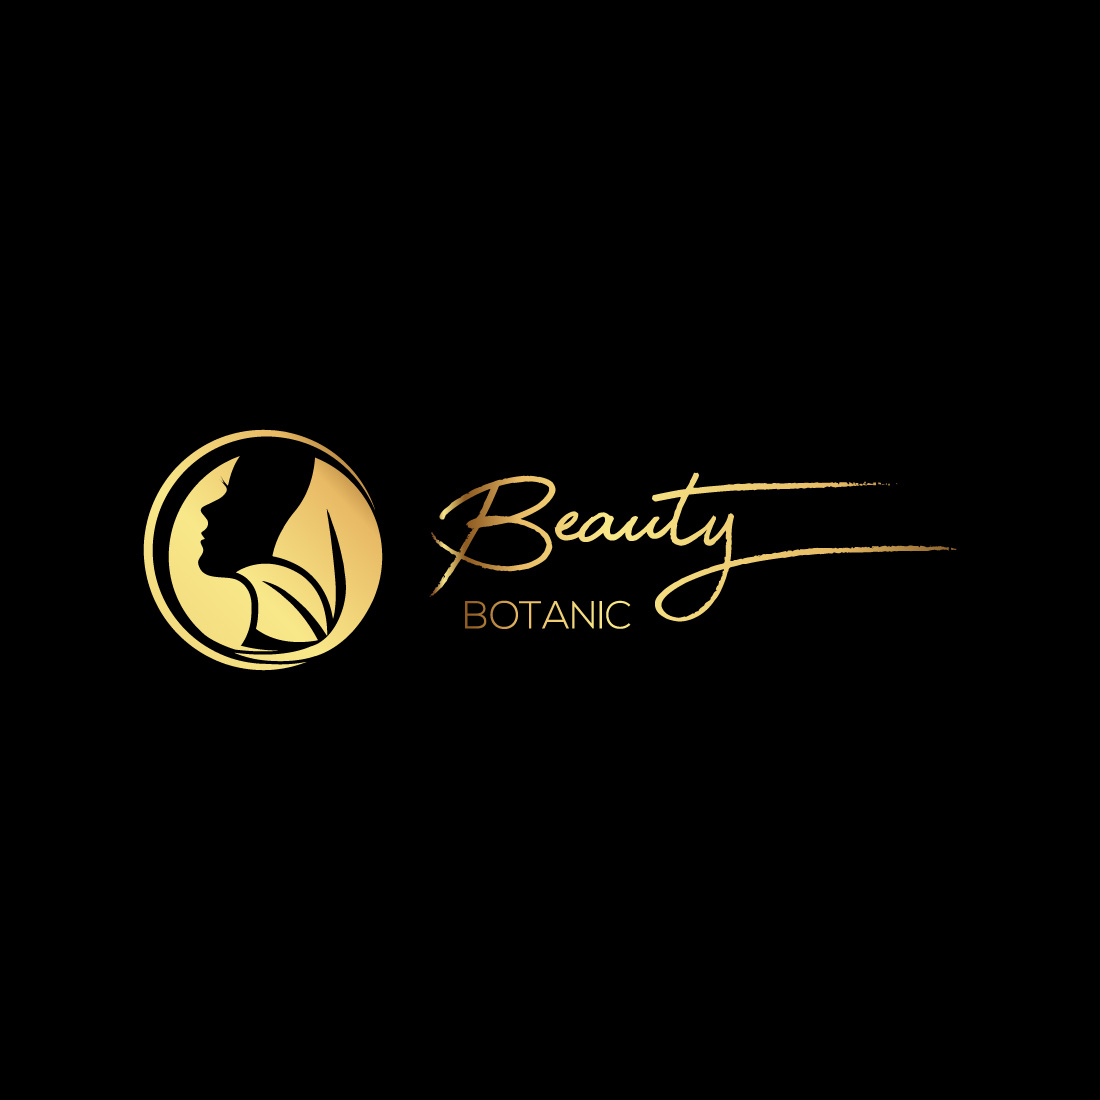 Beauty Related Logo Design cover image.